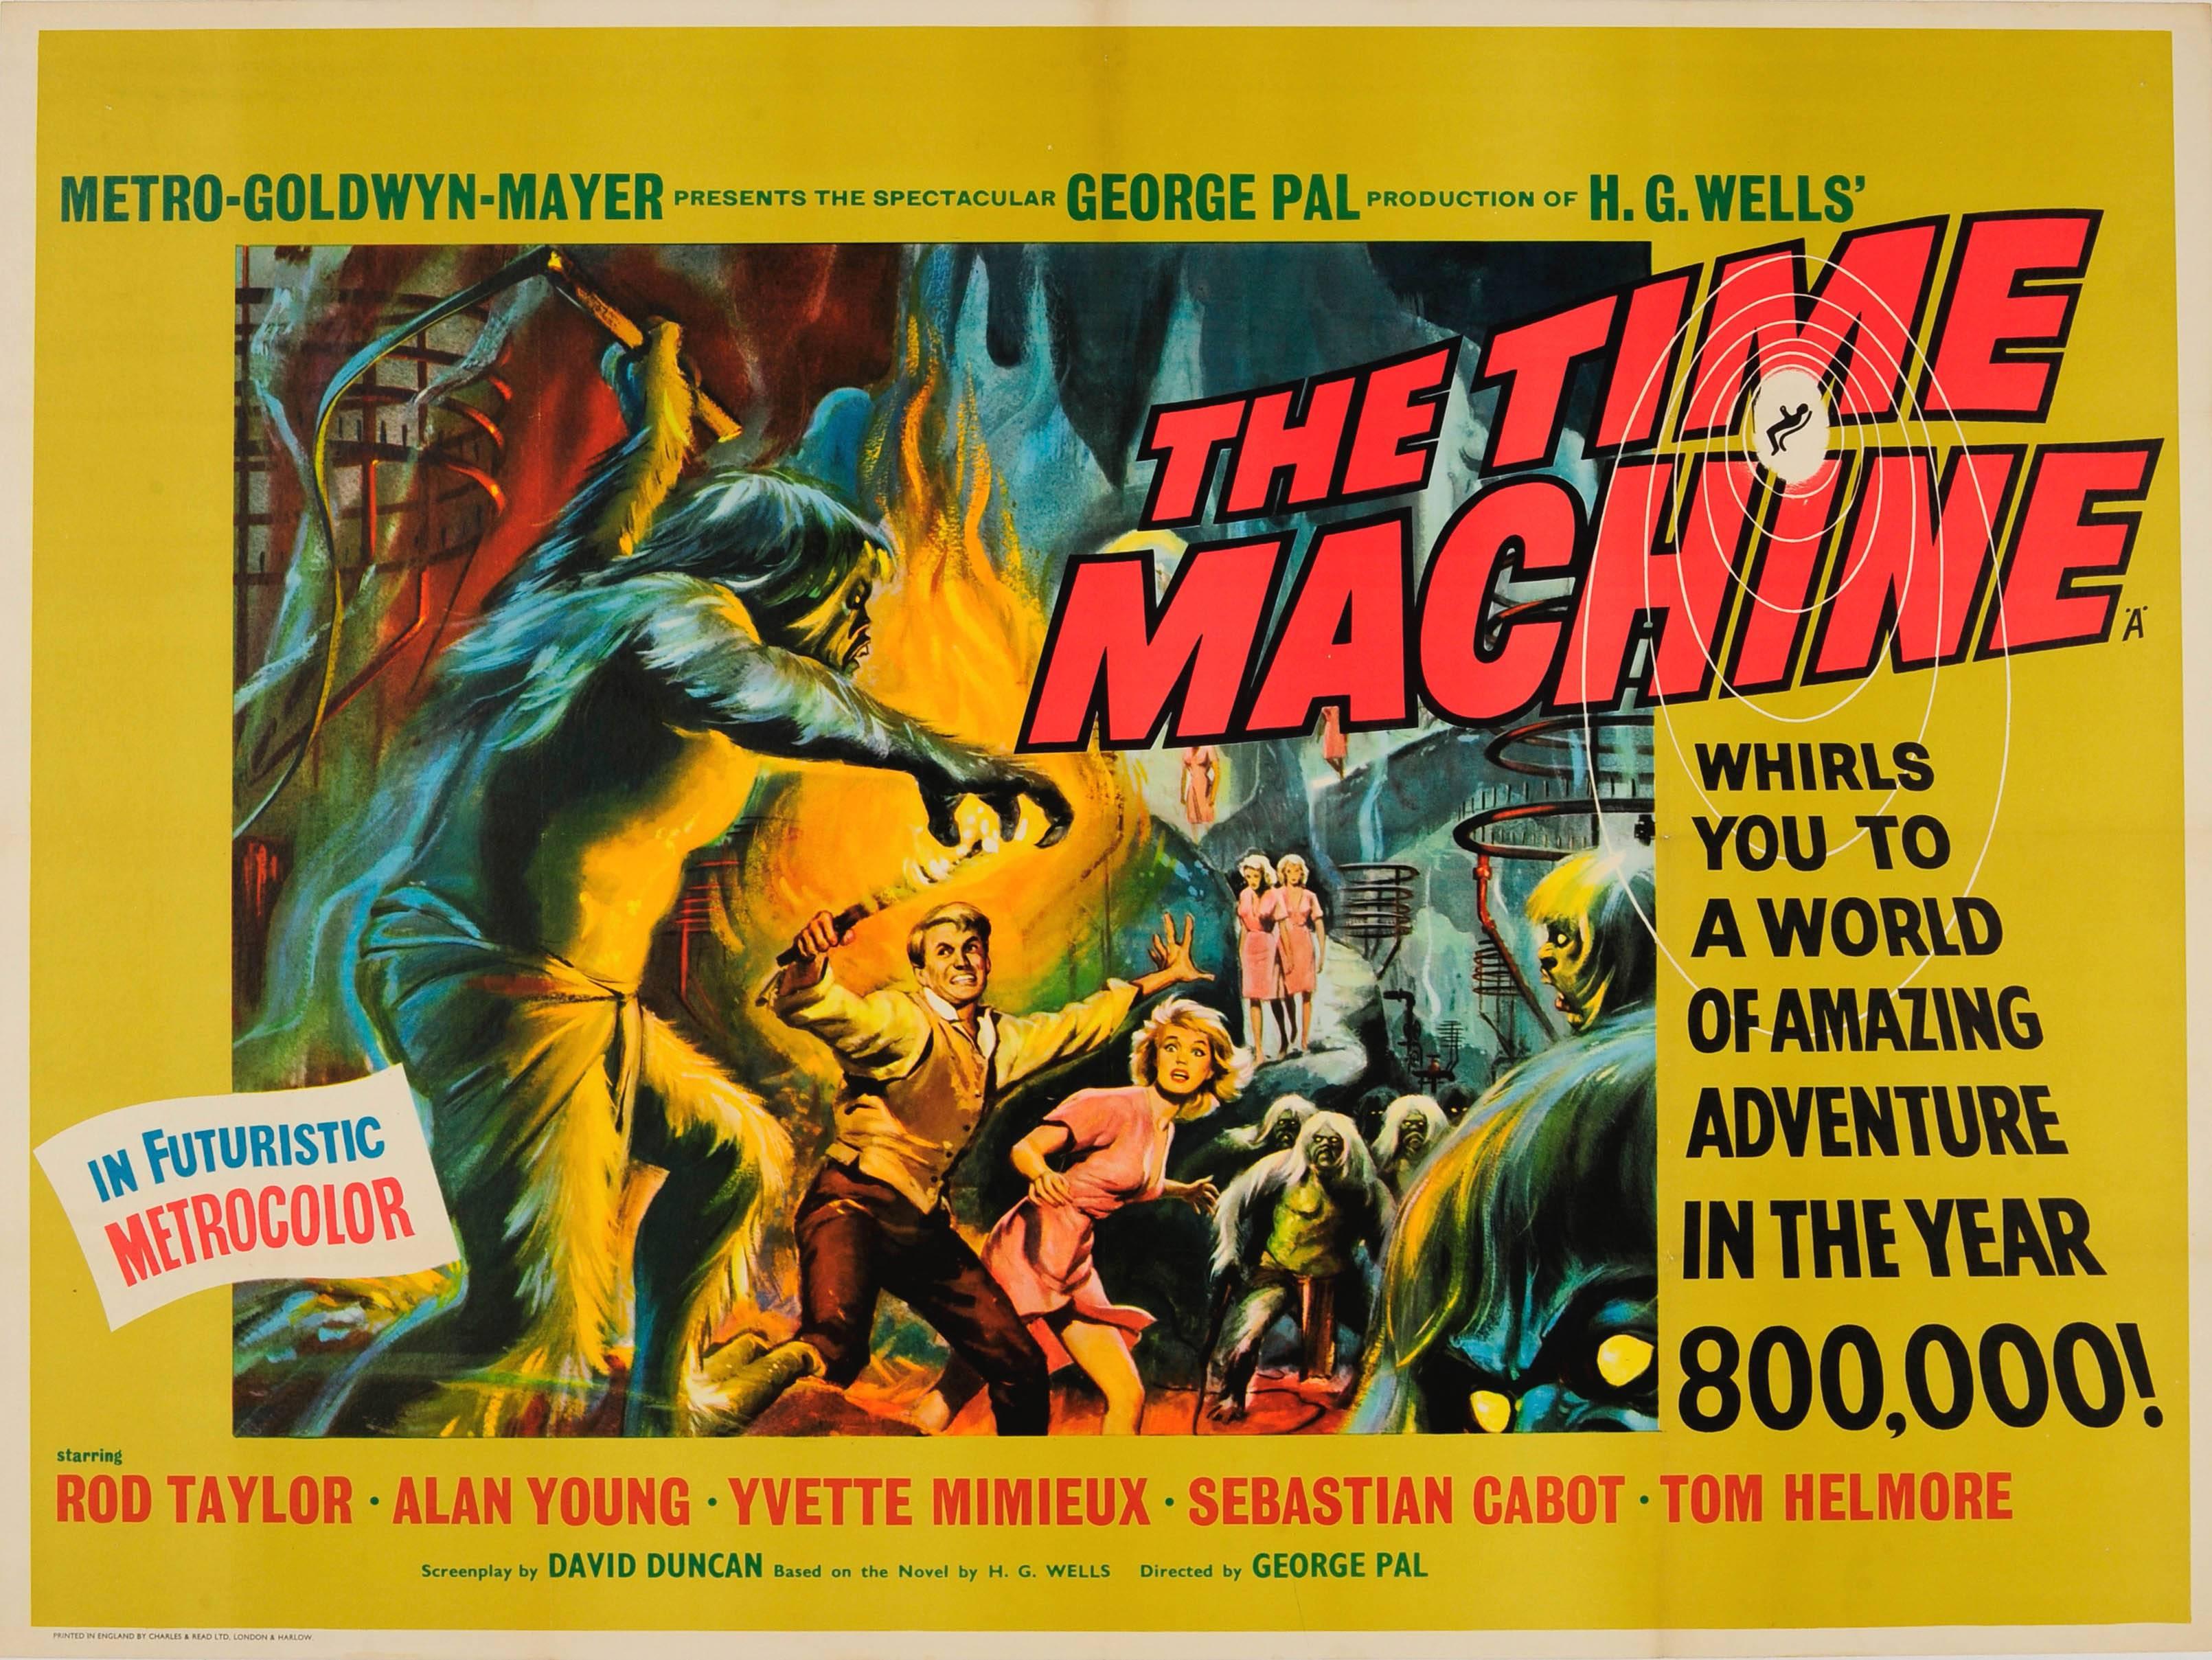 Reynold Brown Print - Original Vintage Science Fiction Movie Poster For The Time Machine By H.G. Wells